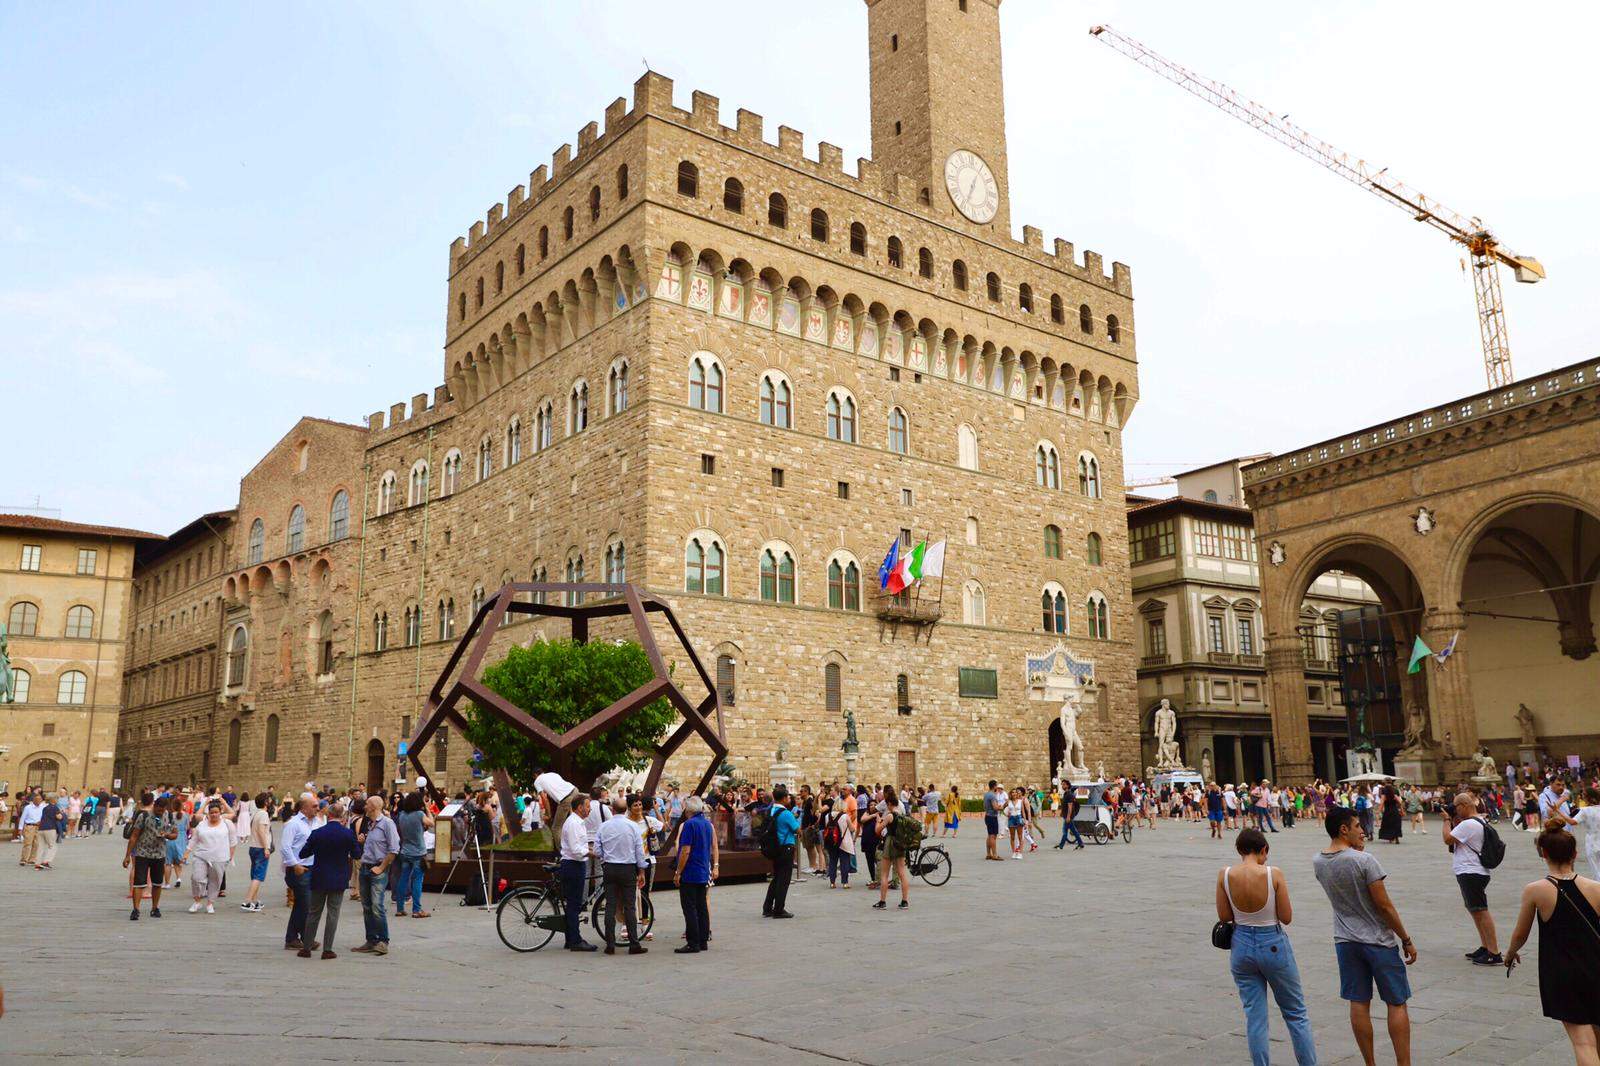 Florence, six-meter-high dodecahedron arrives in Piazza della Signoria paying homage to Leonardo